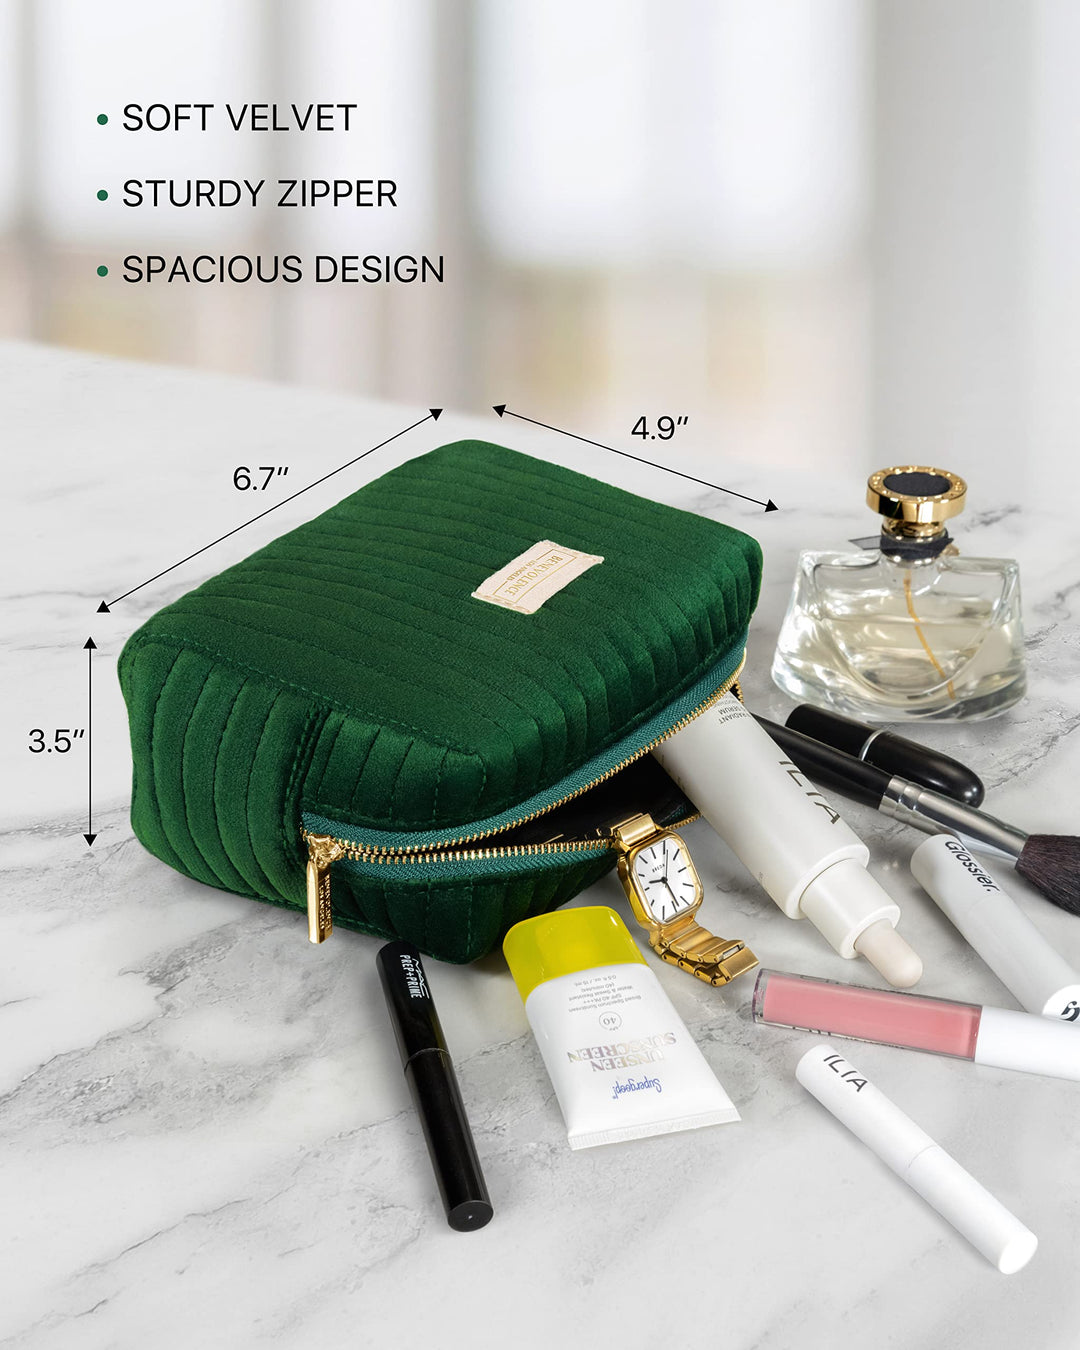 MITSICO Women Travel Bra Underwear Lingerie Organizer, Cosmetic Makeup  Toiletry Bag at Rs 150/piece, New Items in Surat